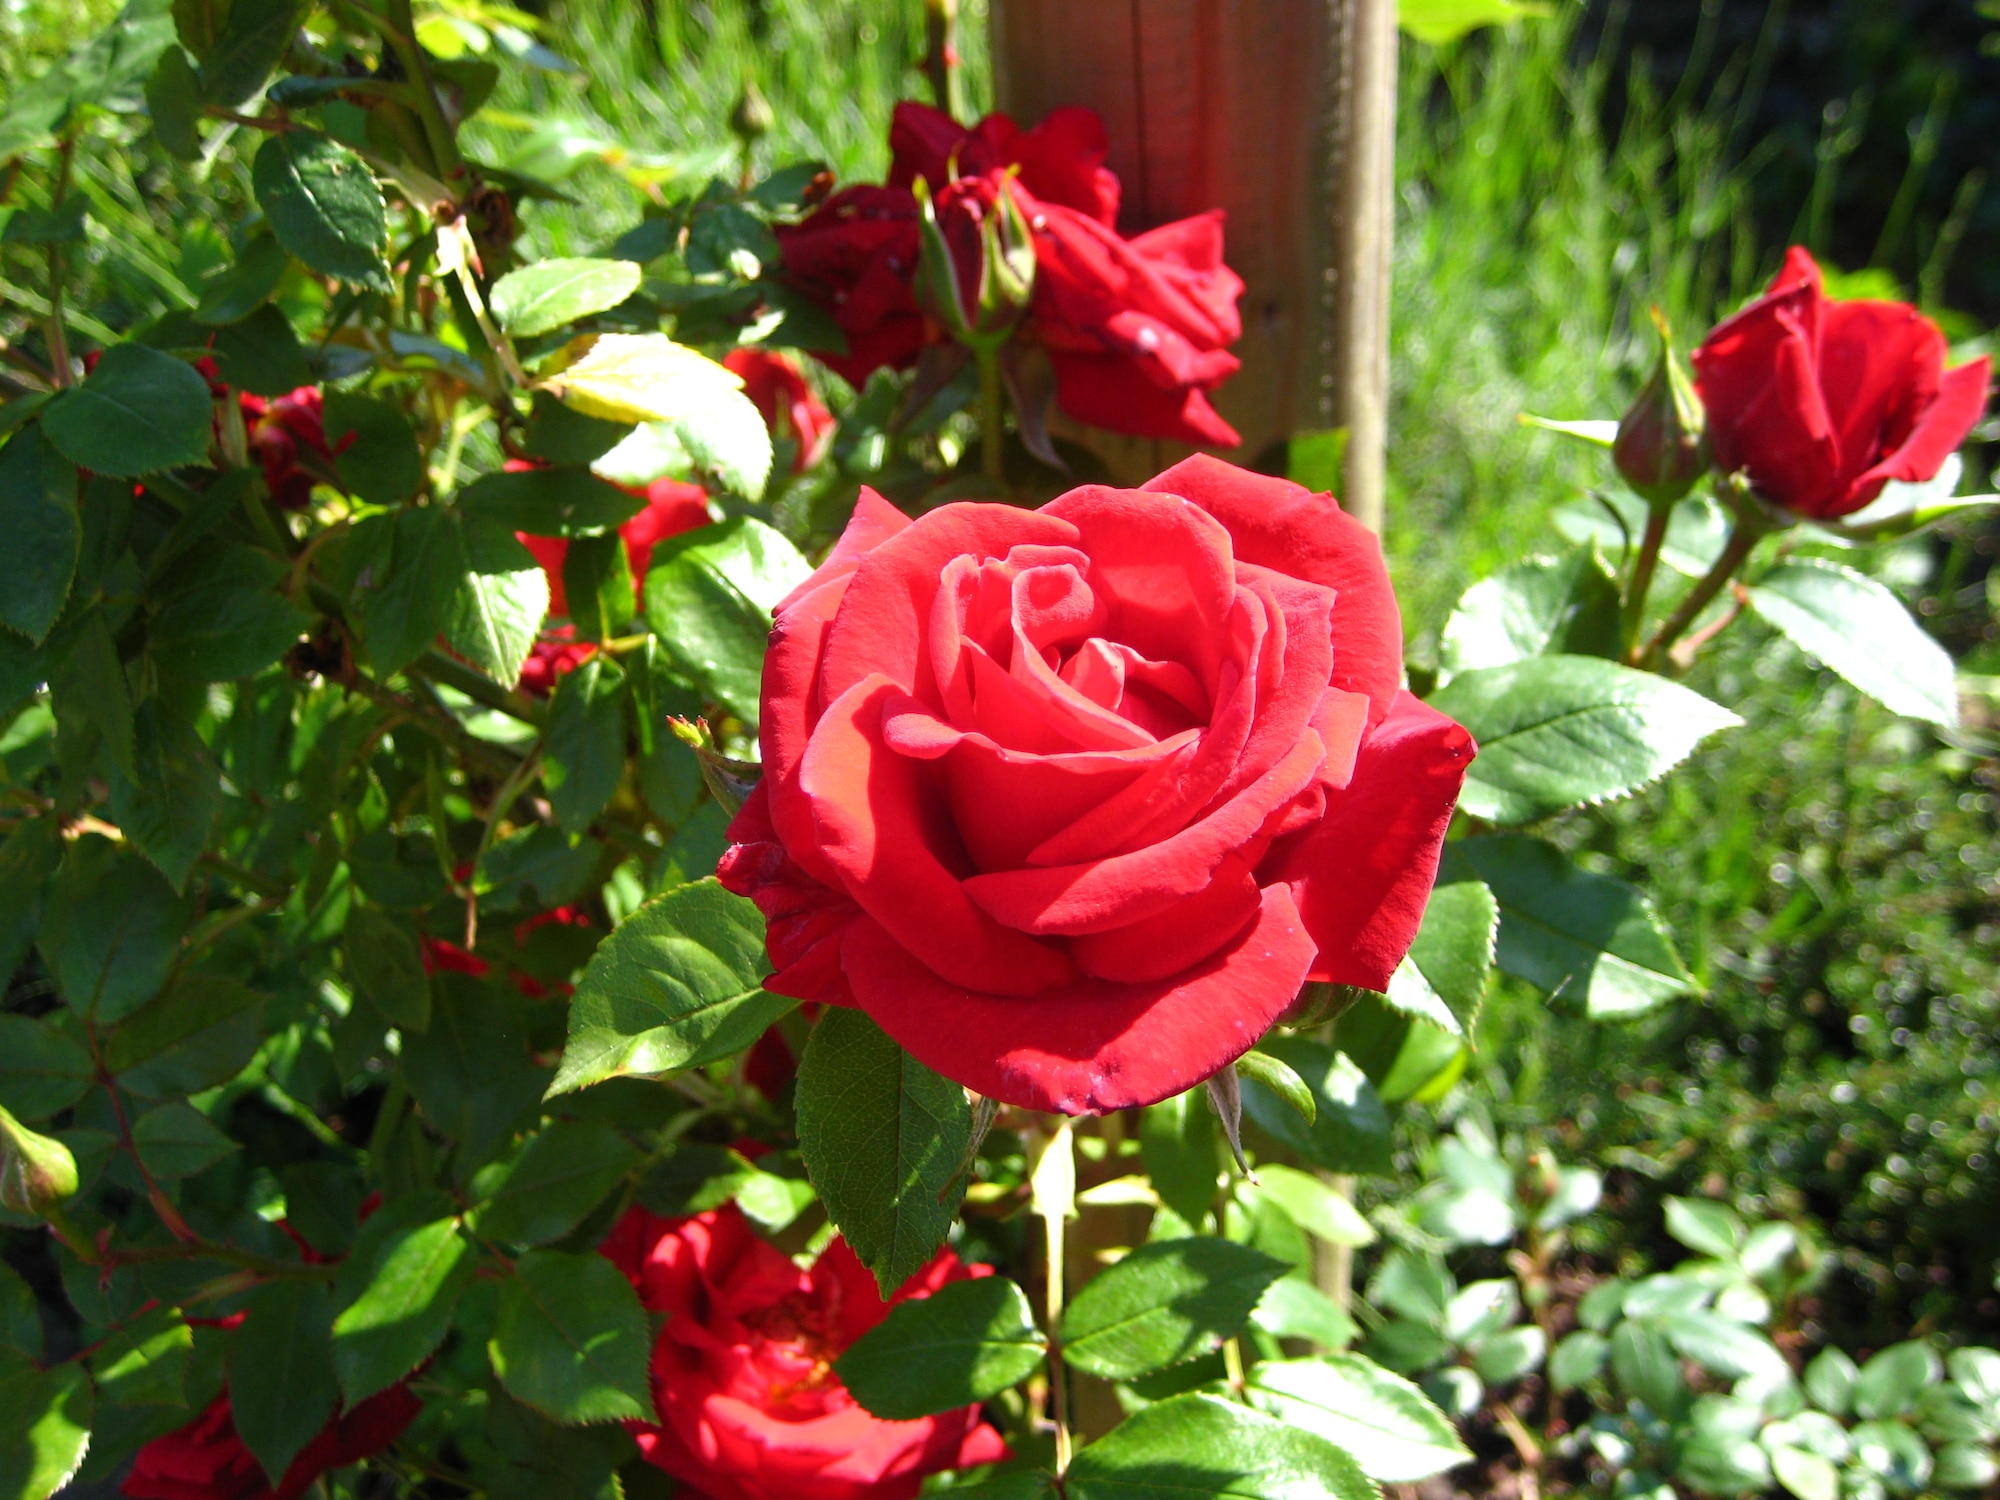 The traditional English rose has been England’s emblem since the time of the War of the Roses between 1455 and 1485. Some credit the Romans with the rose’s introduction into Britain in the 1st century A.D. (Photo by Suzanne Harper)